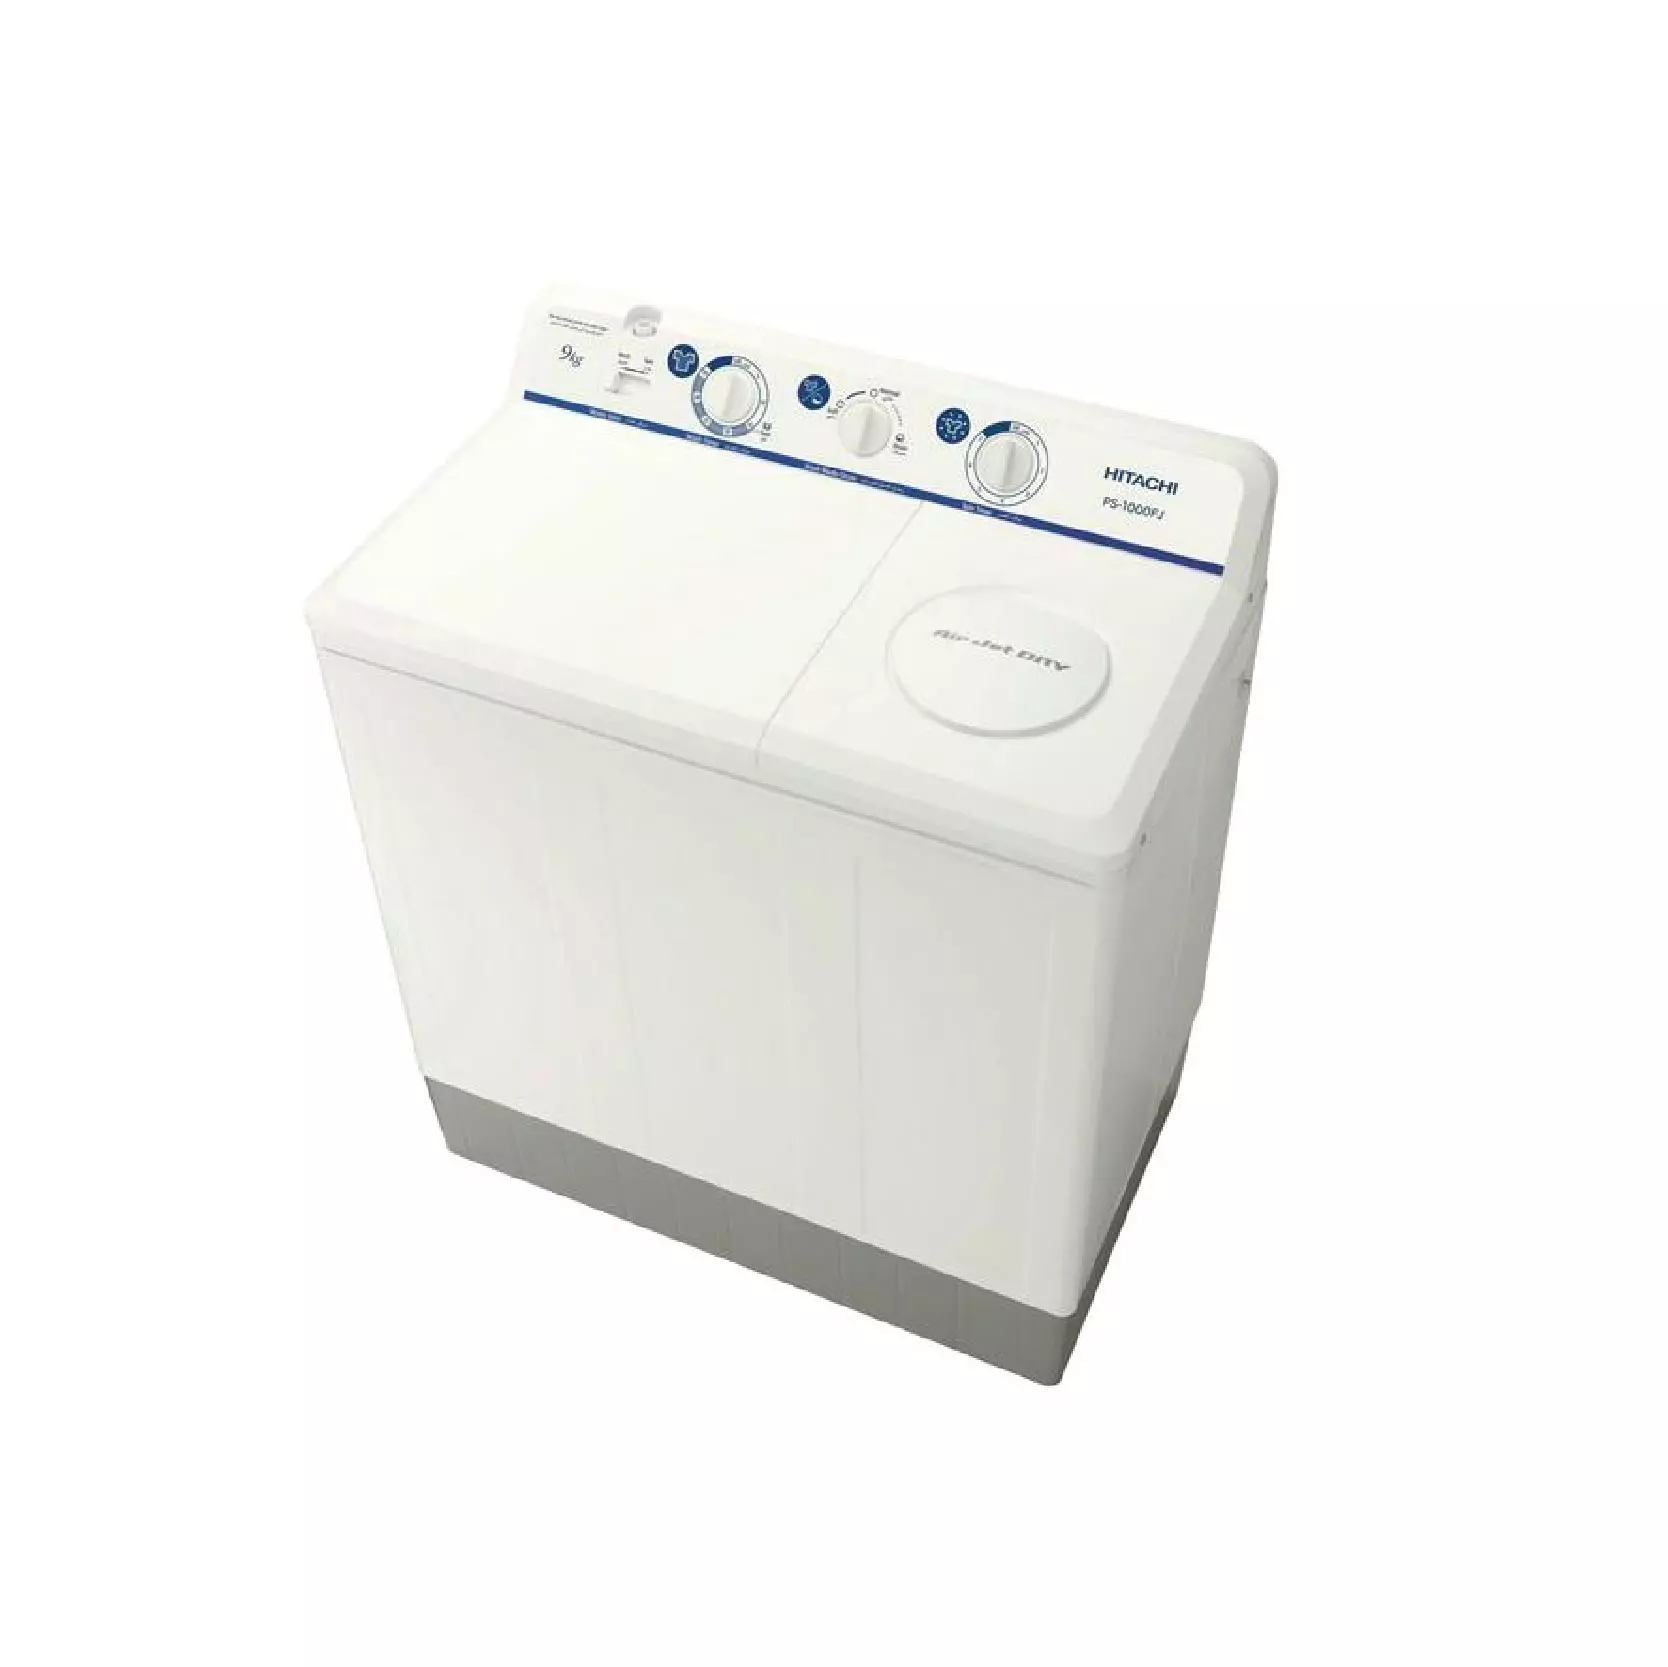 Hitachi ,Twin Tub Washer,9kg, Air Jet Spin Dry,White,PS 